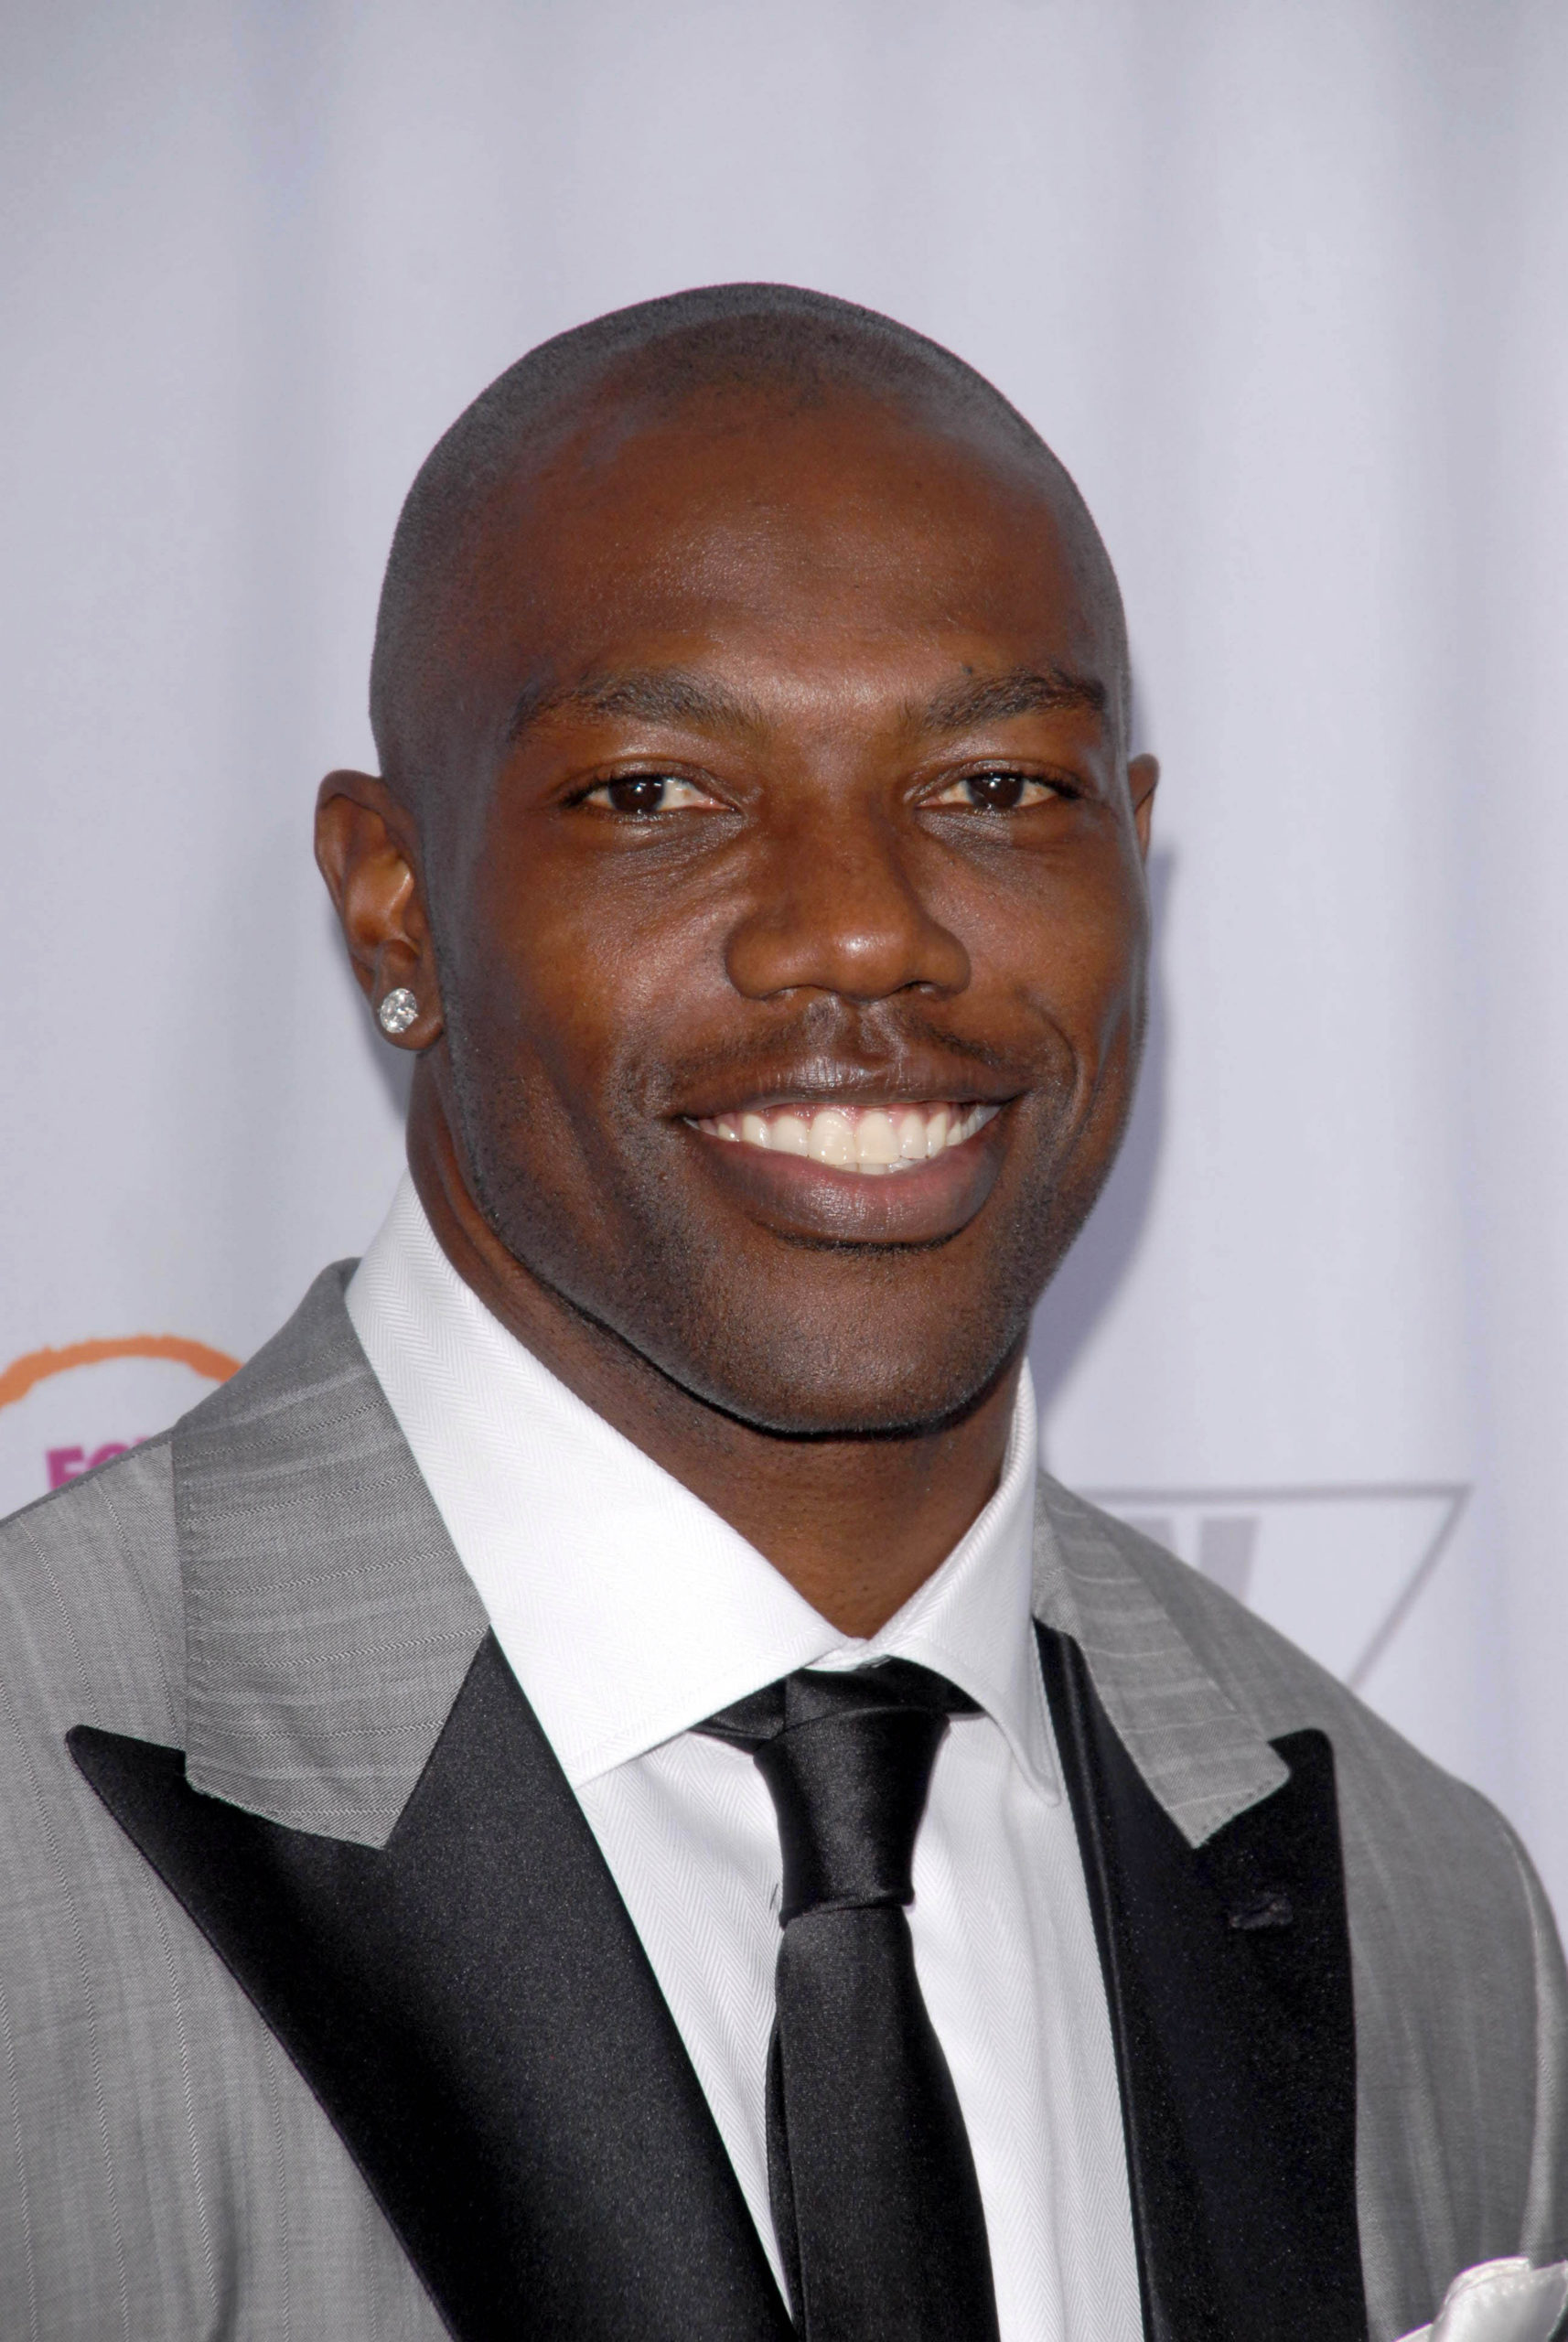 Retired NFL Star Hit By Car | The sports world is praying for retired NFL star Terrell Owens after reports reveal he was hit by a car.